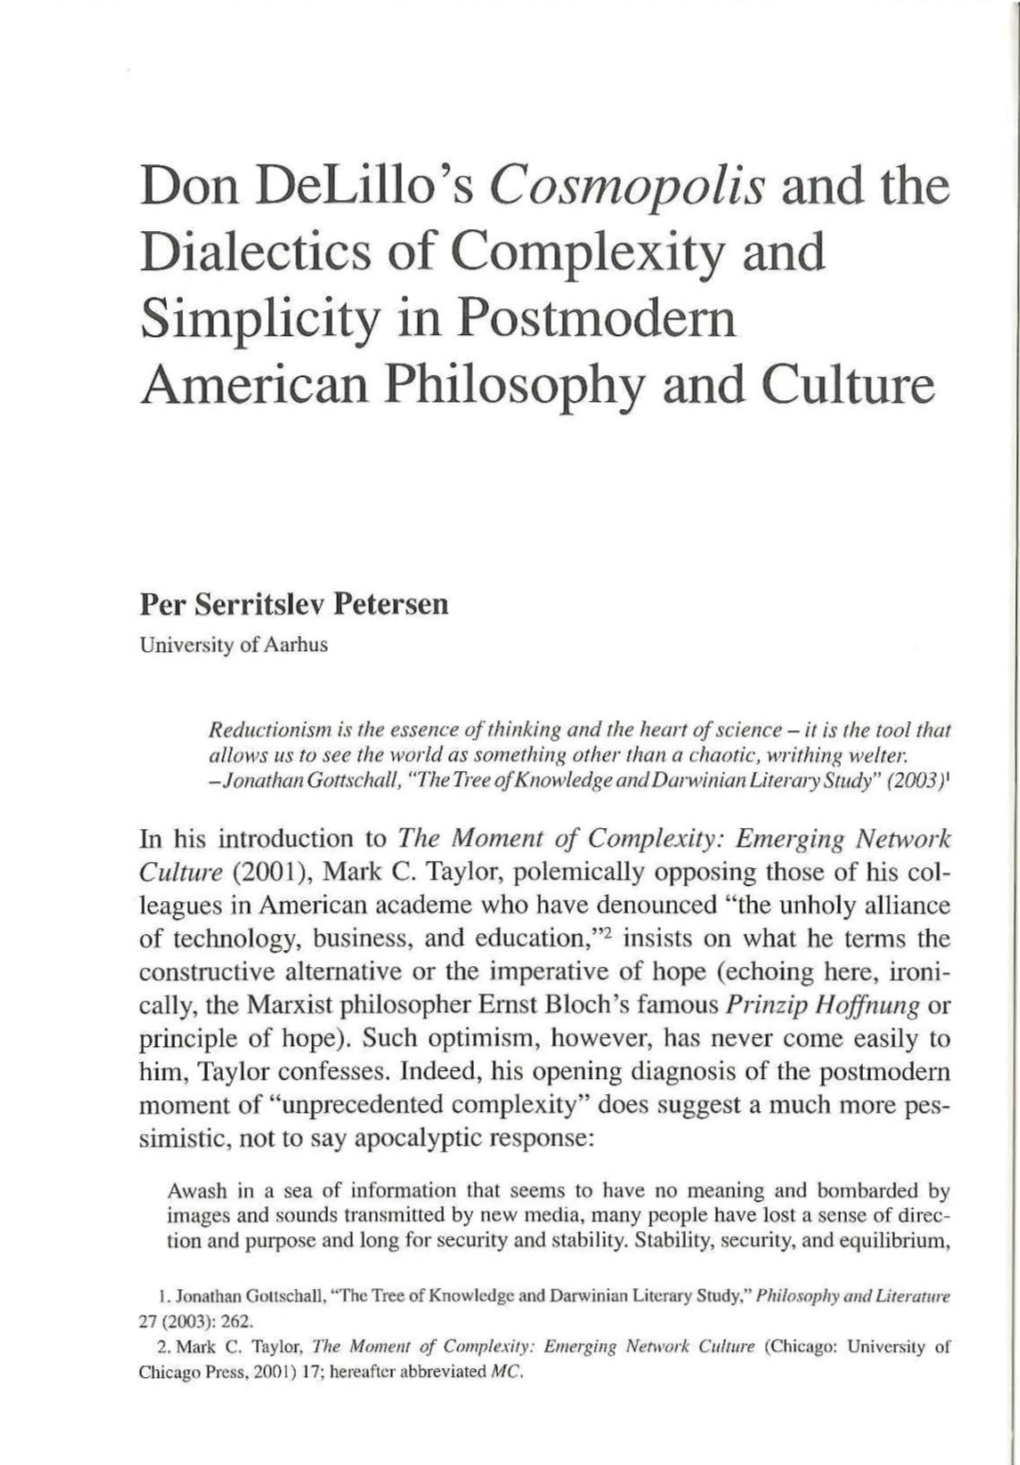 Don Delillo's Cosmopolis and the Dialectics of Complexity and Simplicity in Postmodern American Philosophy and Culture